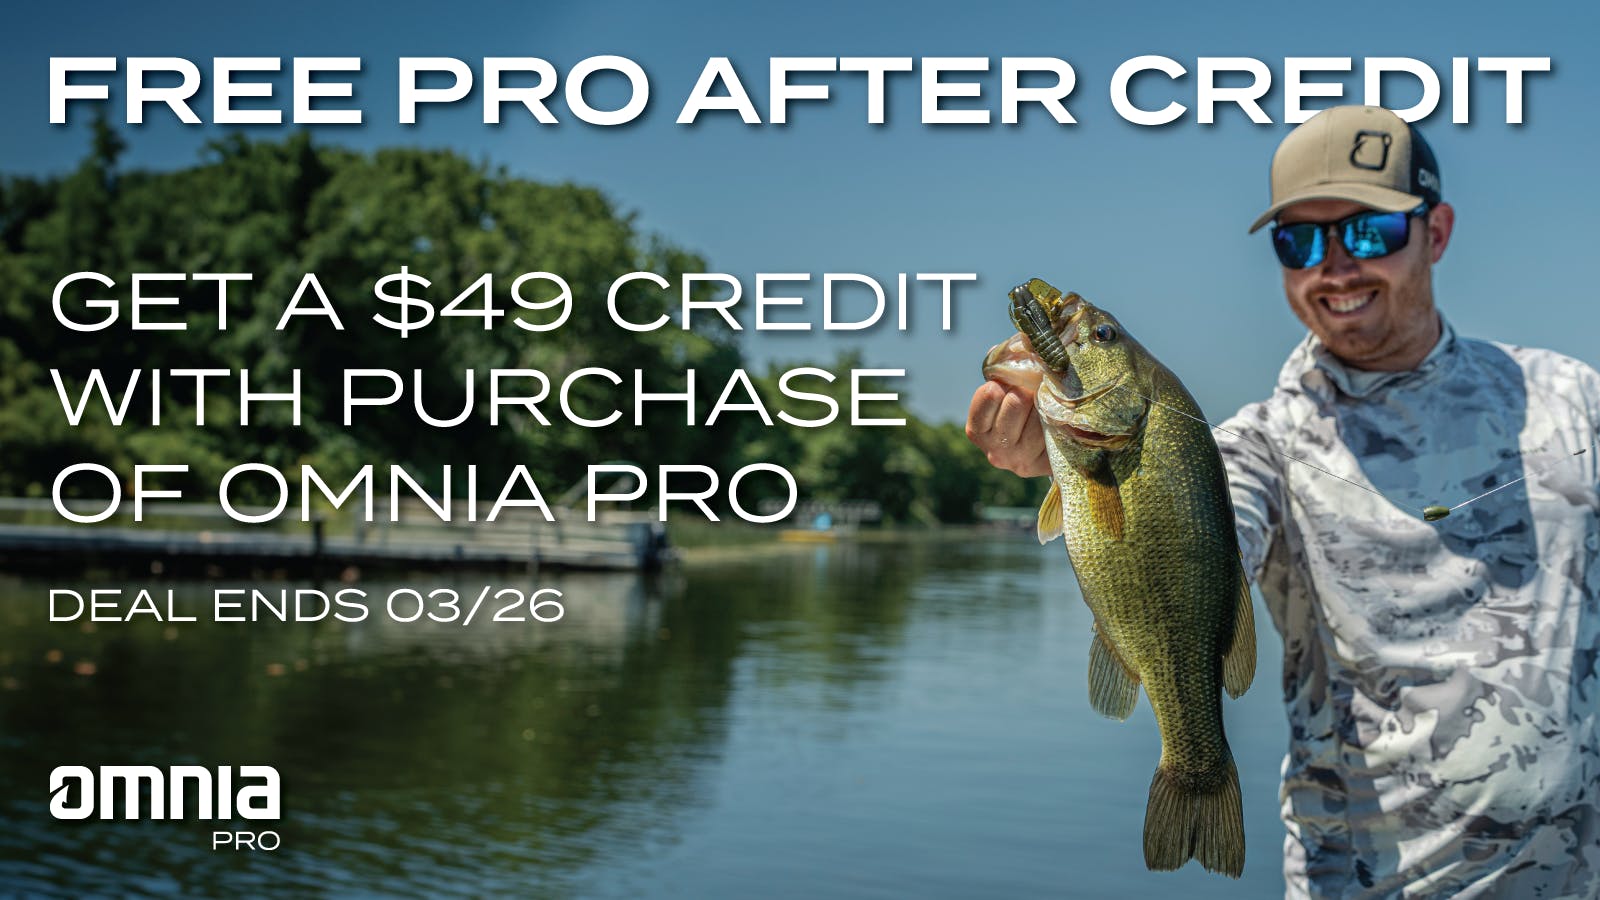 Sale announcement featuring $49 credit for joining Omnia PRO